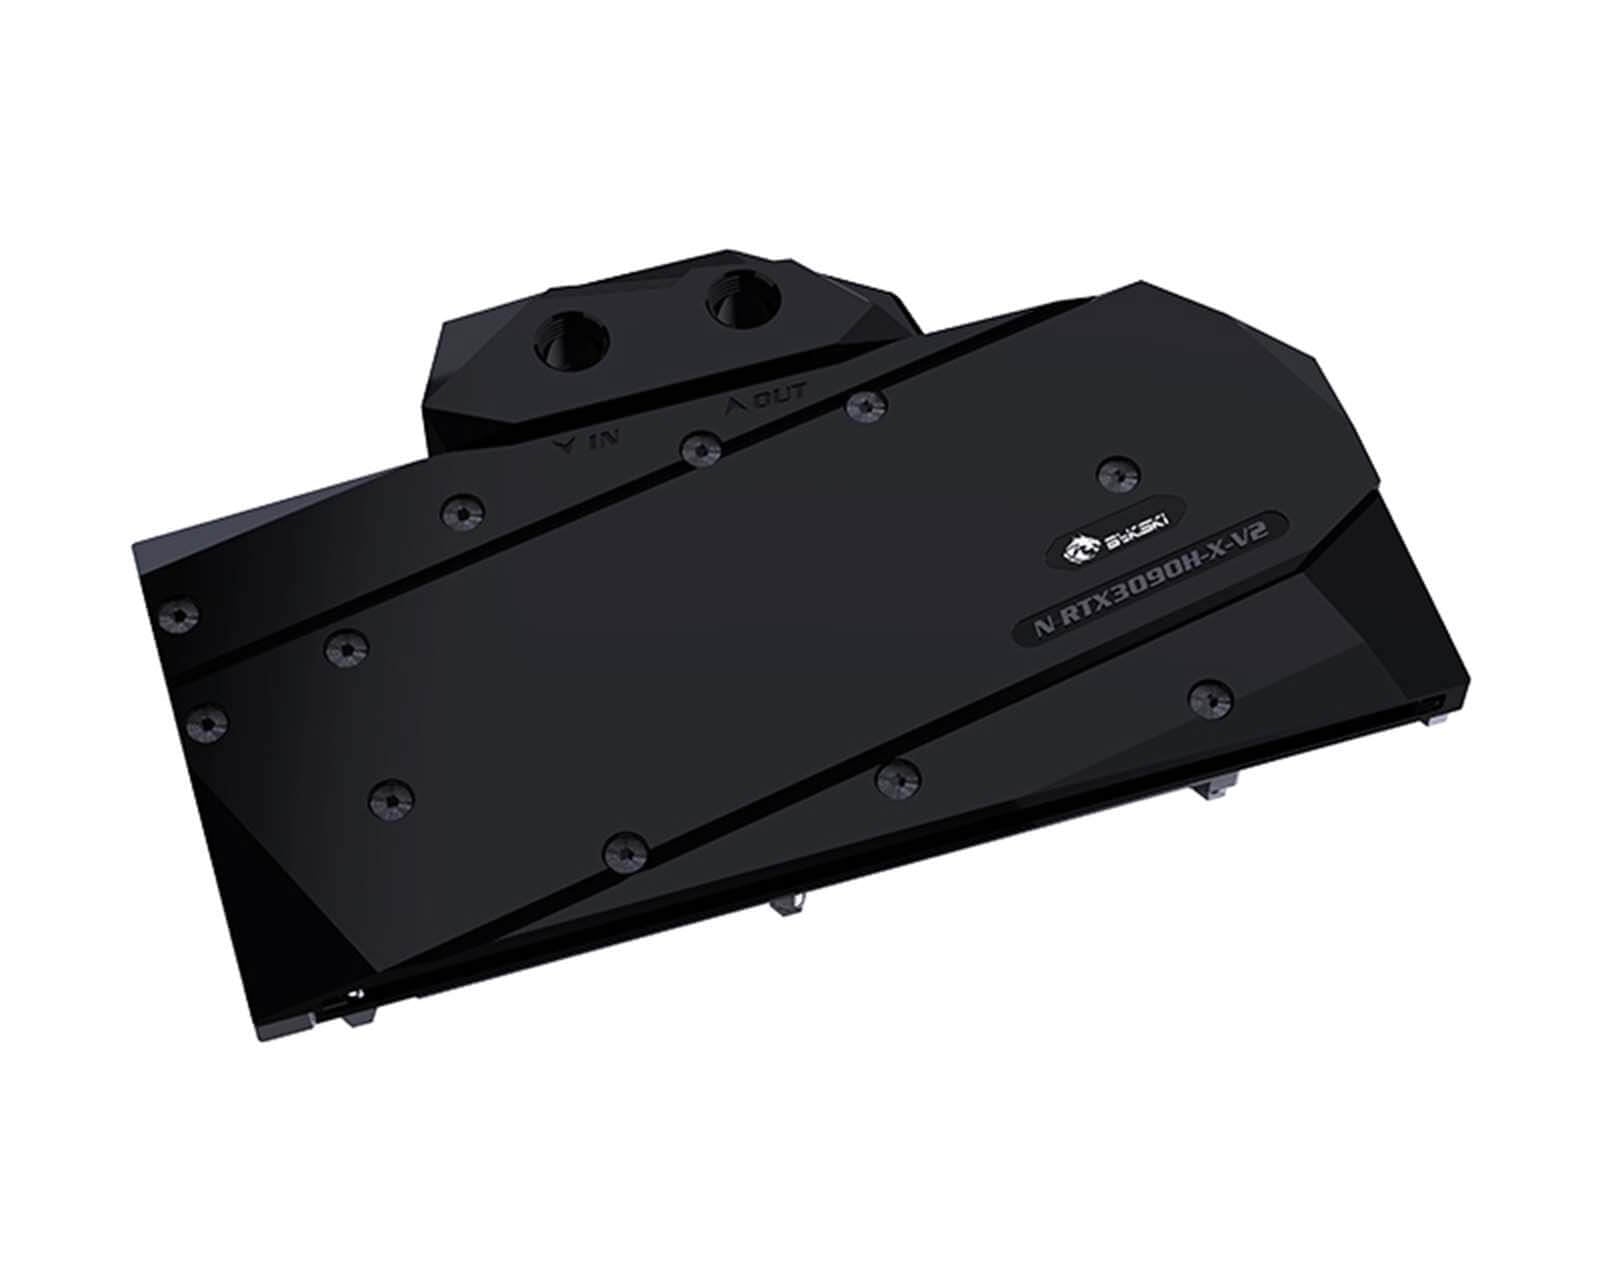 Bykski Full Coverage GPU Water Block and Backplate for AIC Reference RTX 3080/3090 - Version 2 - Black POM (N-RTX3090H-X-V2) - PrimoChill - KEEPING IT COOL